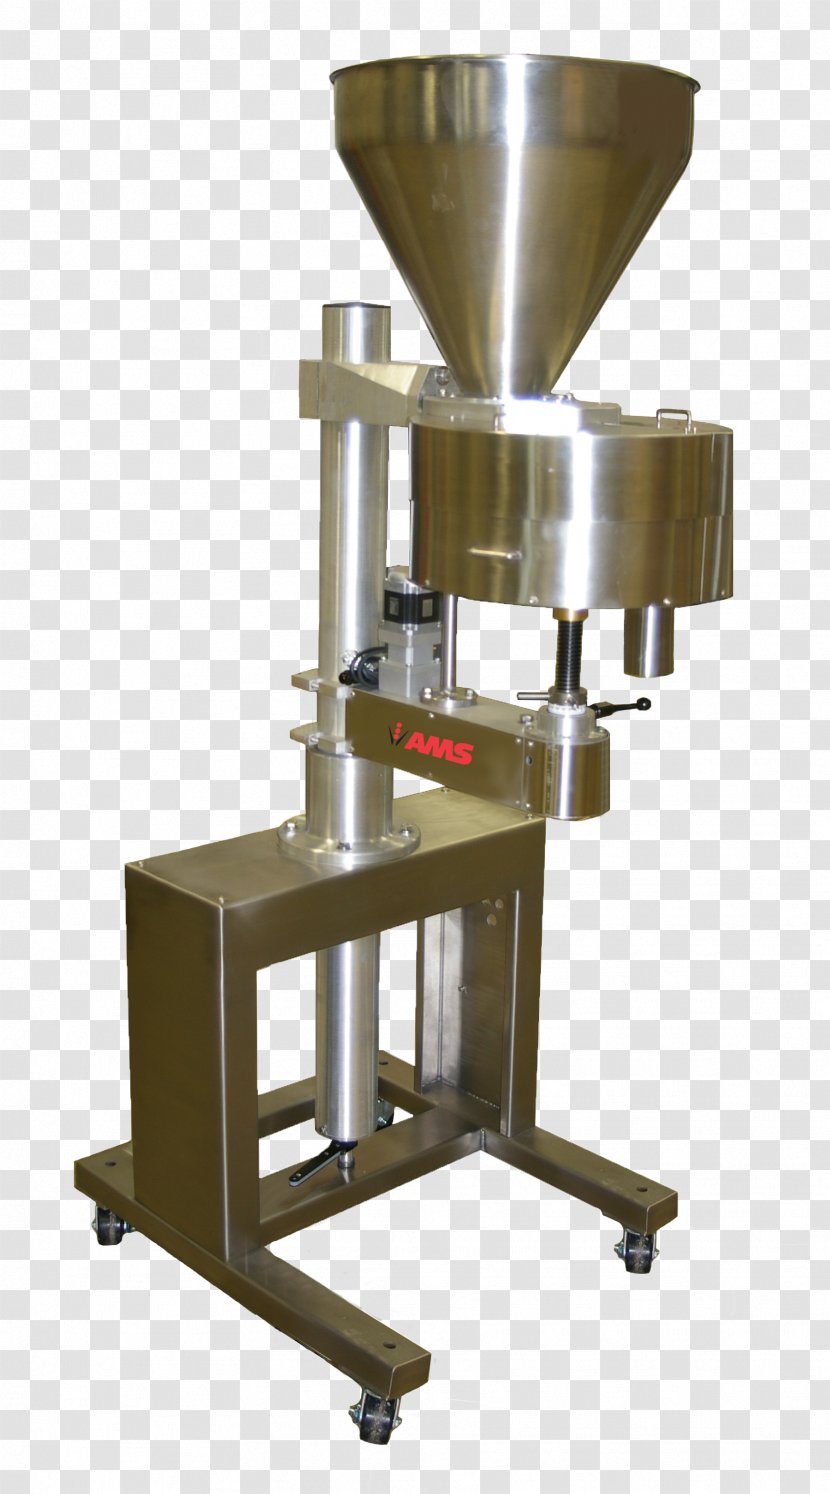 Machine AMS Filling Systems Inc Spheretech Packaging India Private Limited Manufacturing Industrial Design - Small Appliance - Chemical Automatics Bureau Transparent PNG